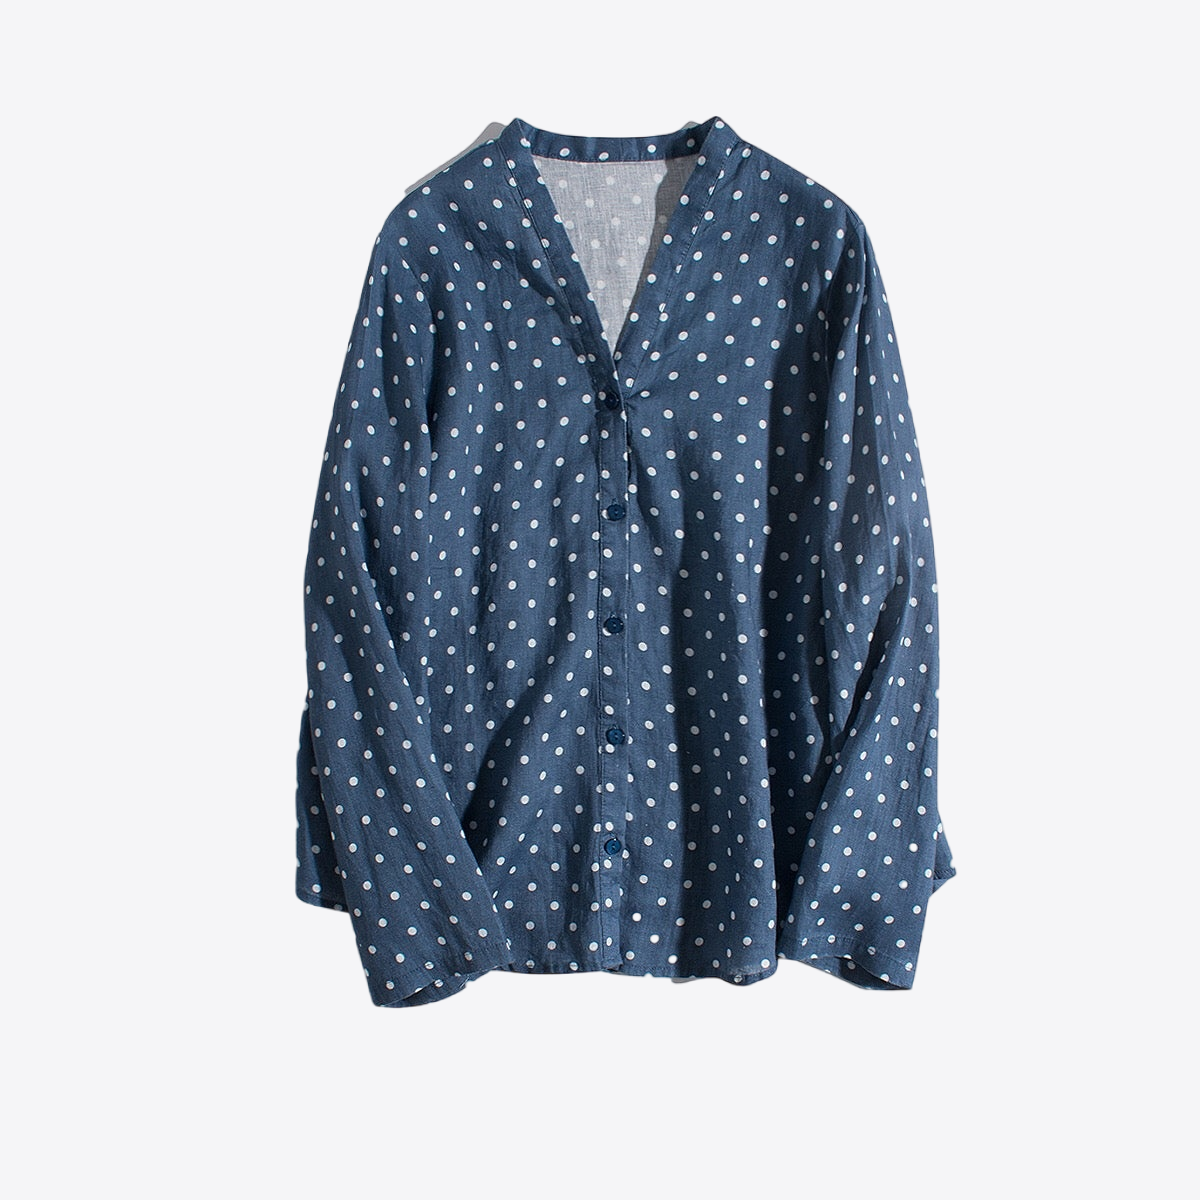 Blueberry Melon Harvest Dots 100% Linen Blouse | Hypoallergenic - Allergy Friendly - Naturally Free